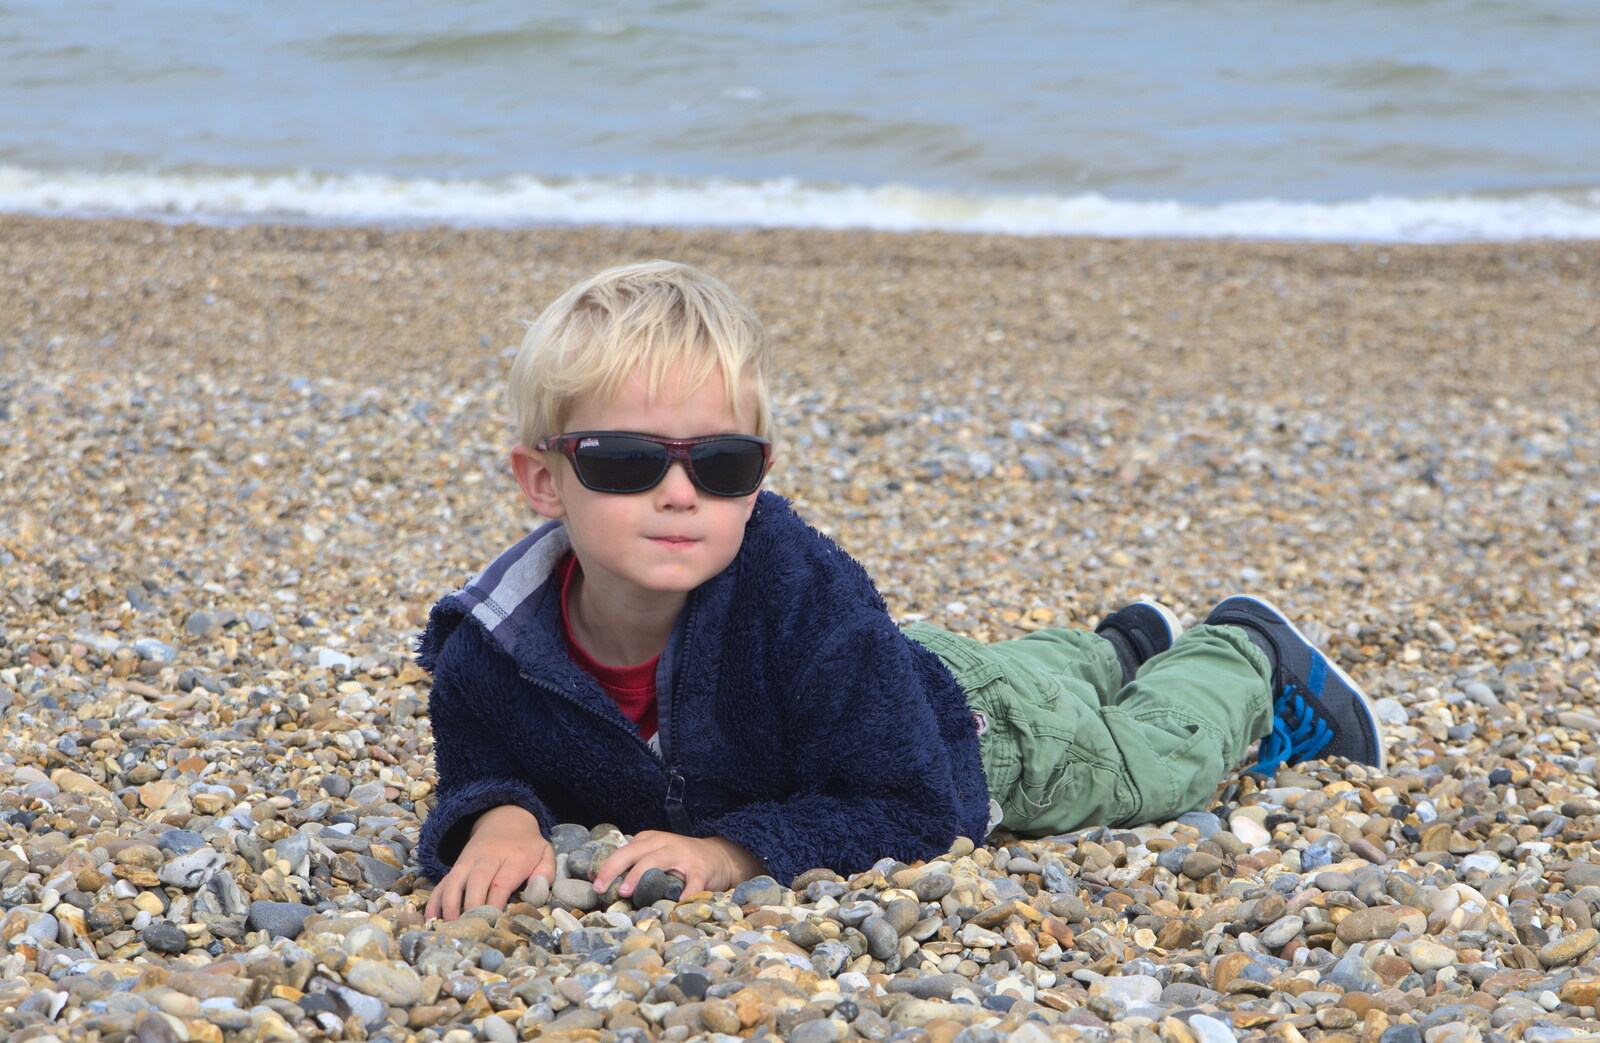 Harry poses on the beach from The Archaeology of Dunwich: A Camping Trip, Dunwich, Suffolk - 1st August 2015